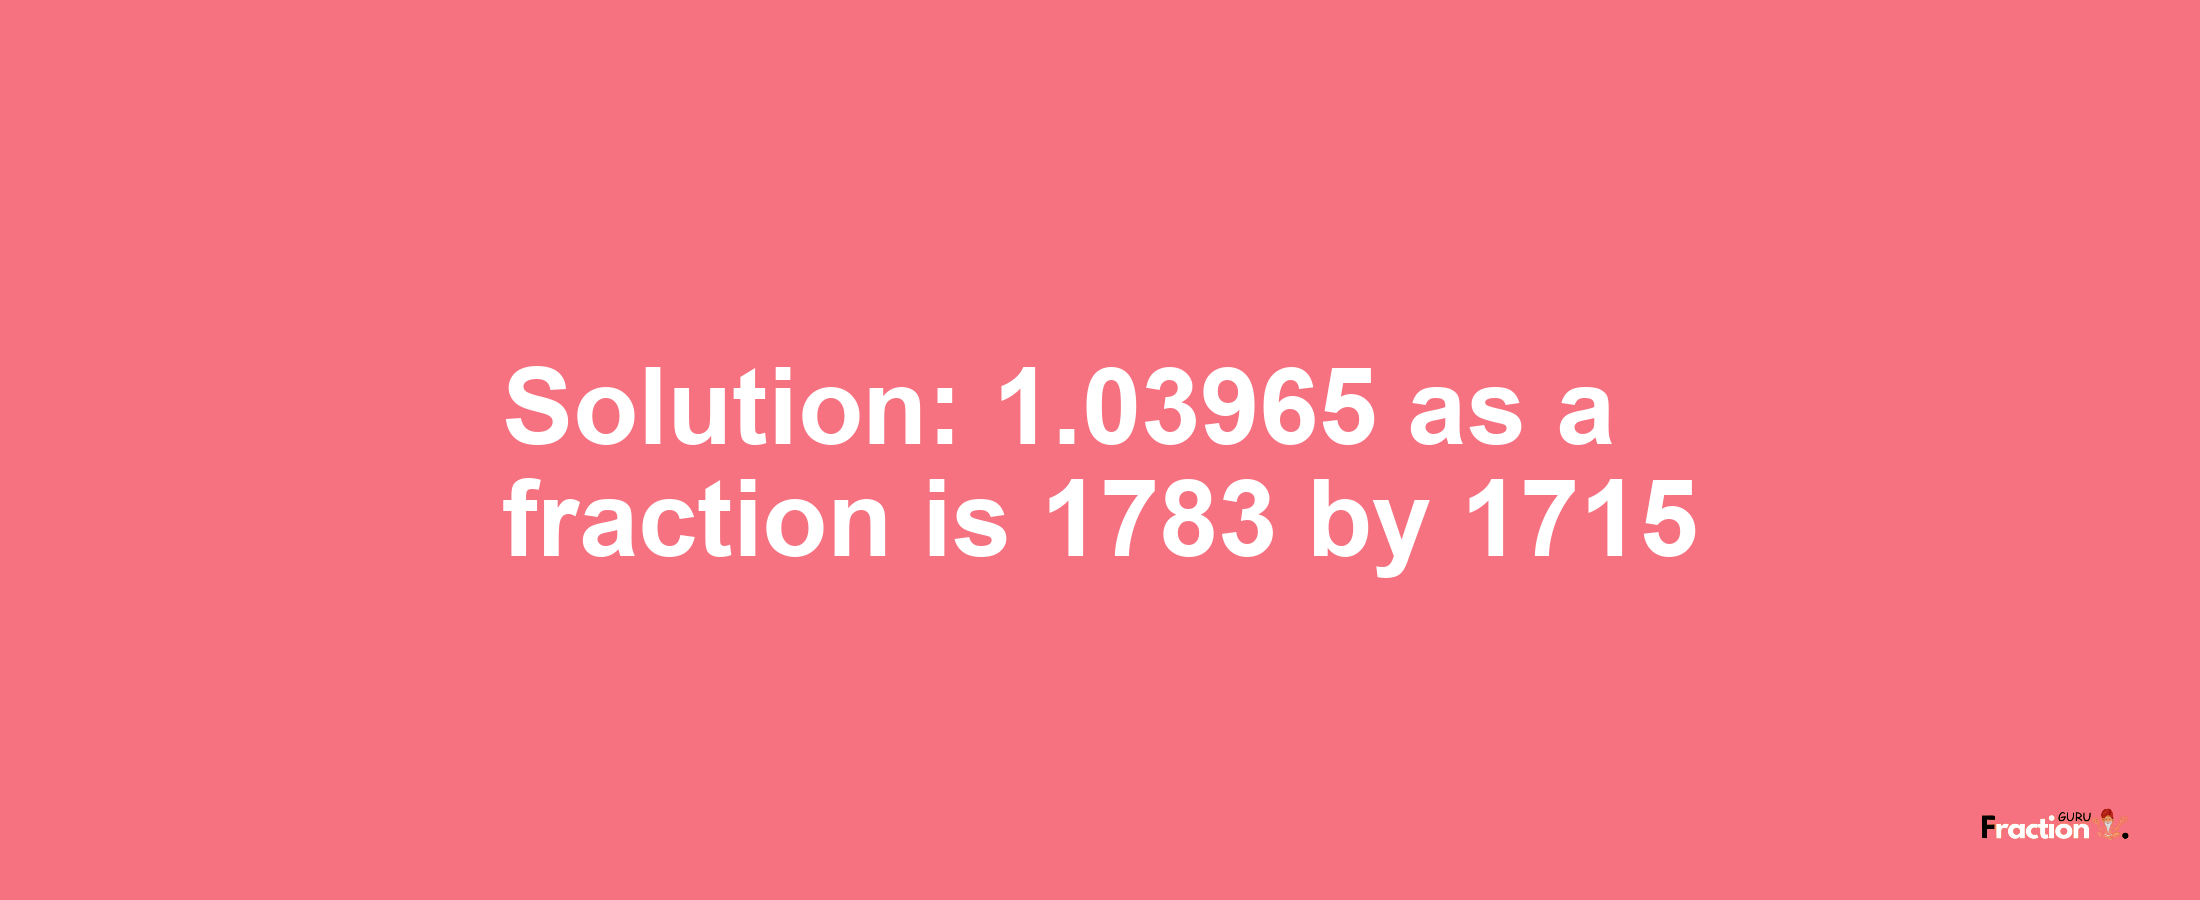 Solution:1.03965 as a fraction is 1783/1715